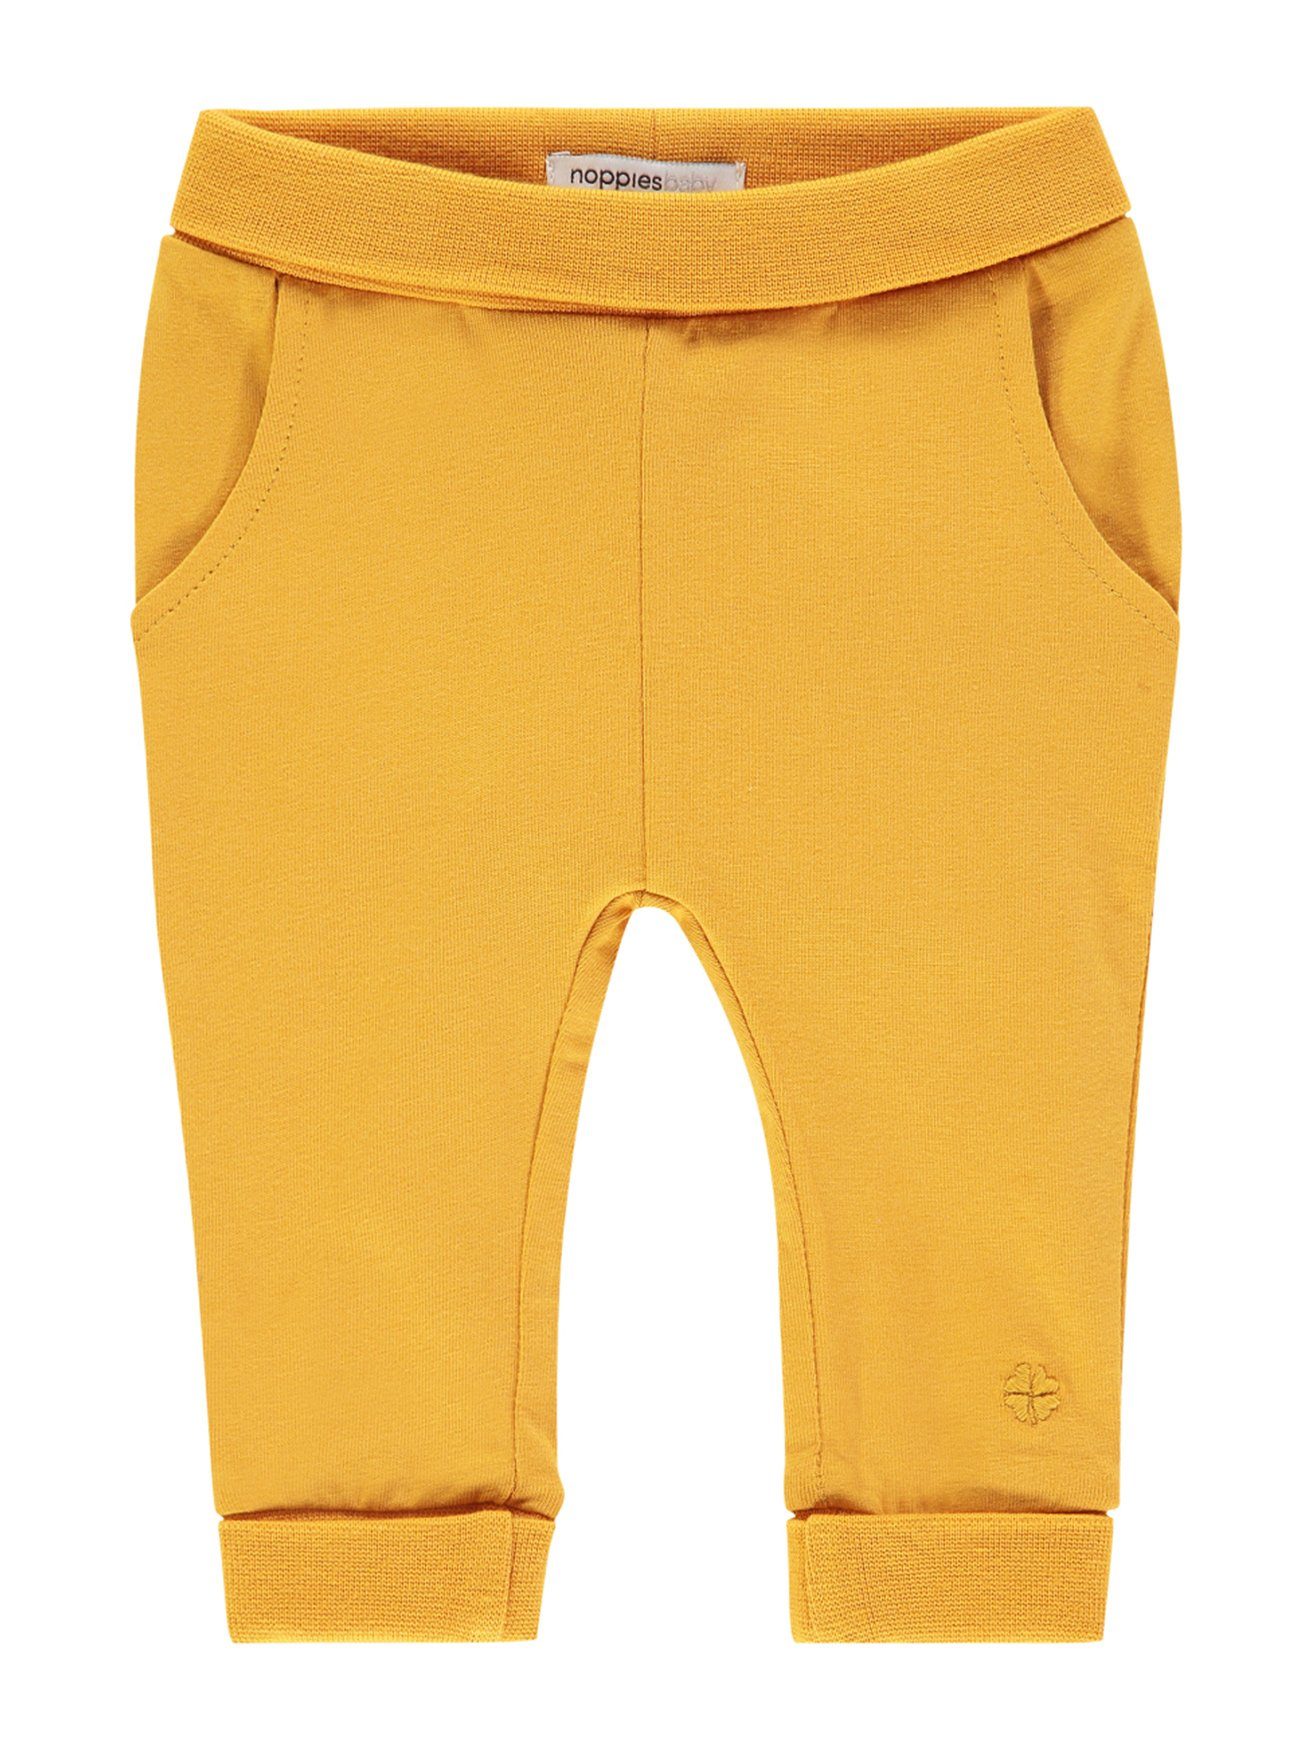 Soft Jersey Trousers - Mustard Yellow Trousers / Leggings Noppies 